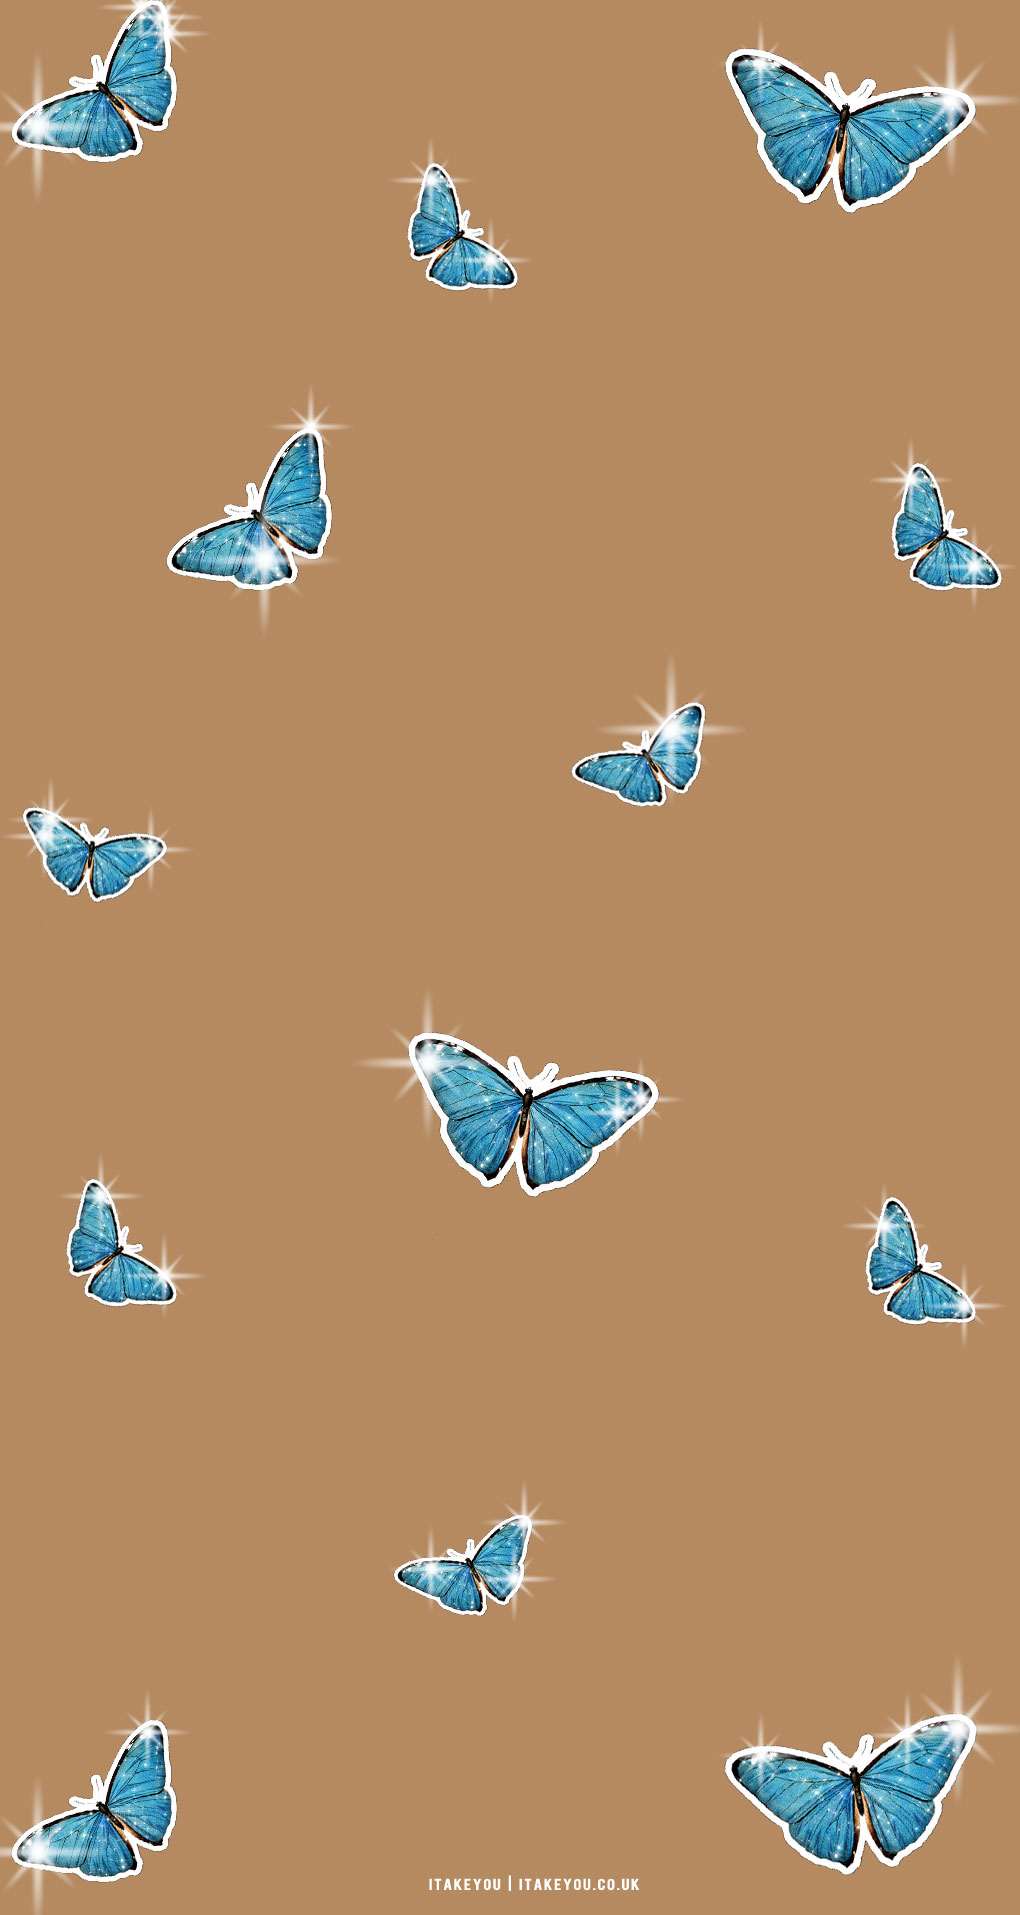 30 Cute Brown Aesthetic Wallpapers for Phone : Shiny Blue Butterflies